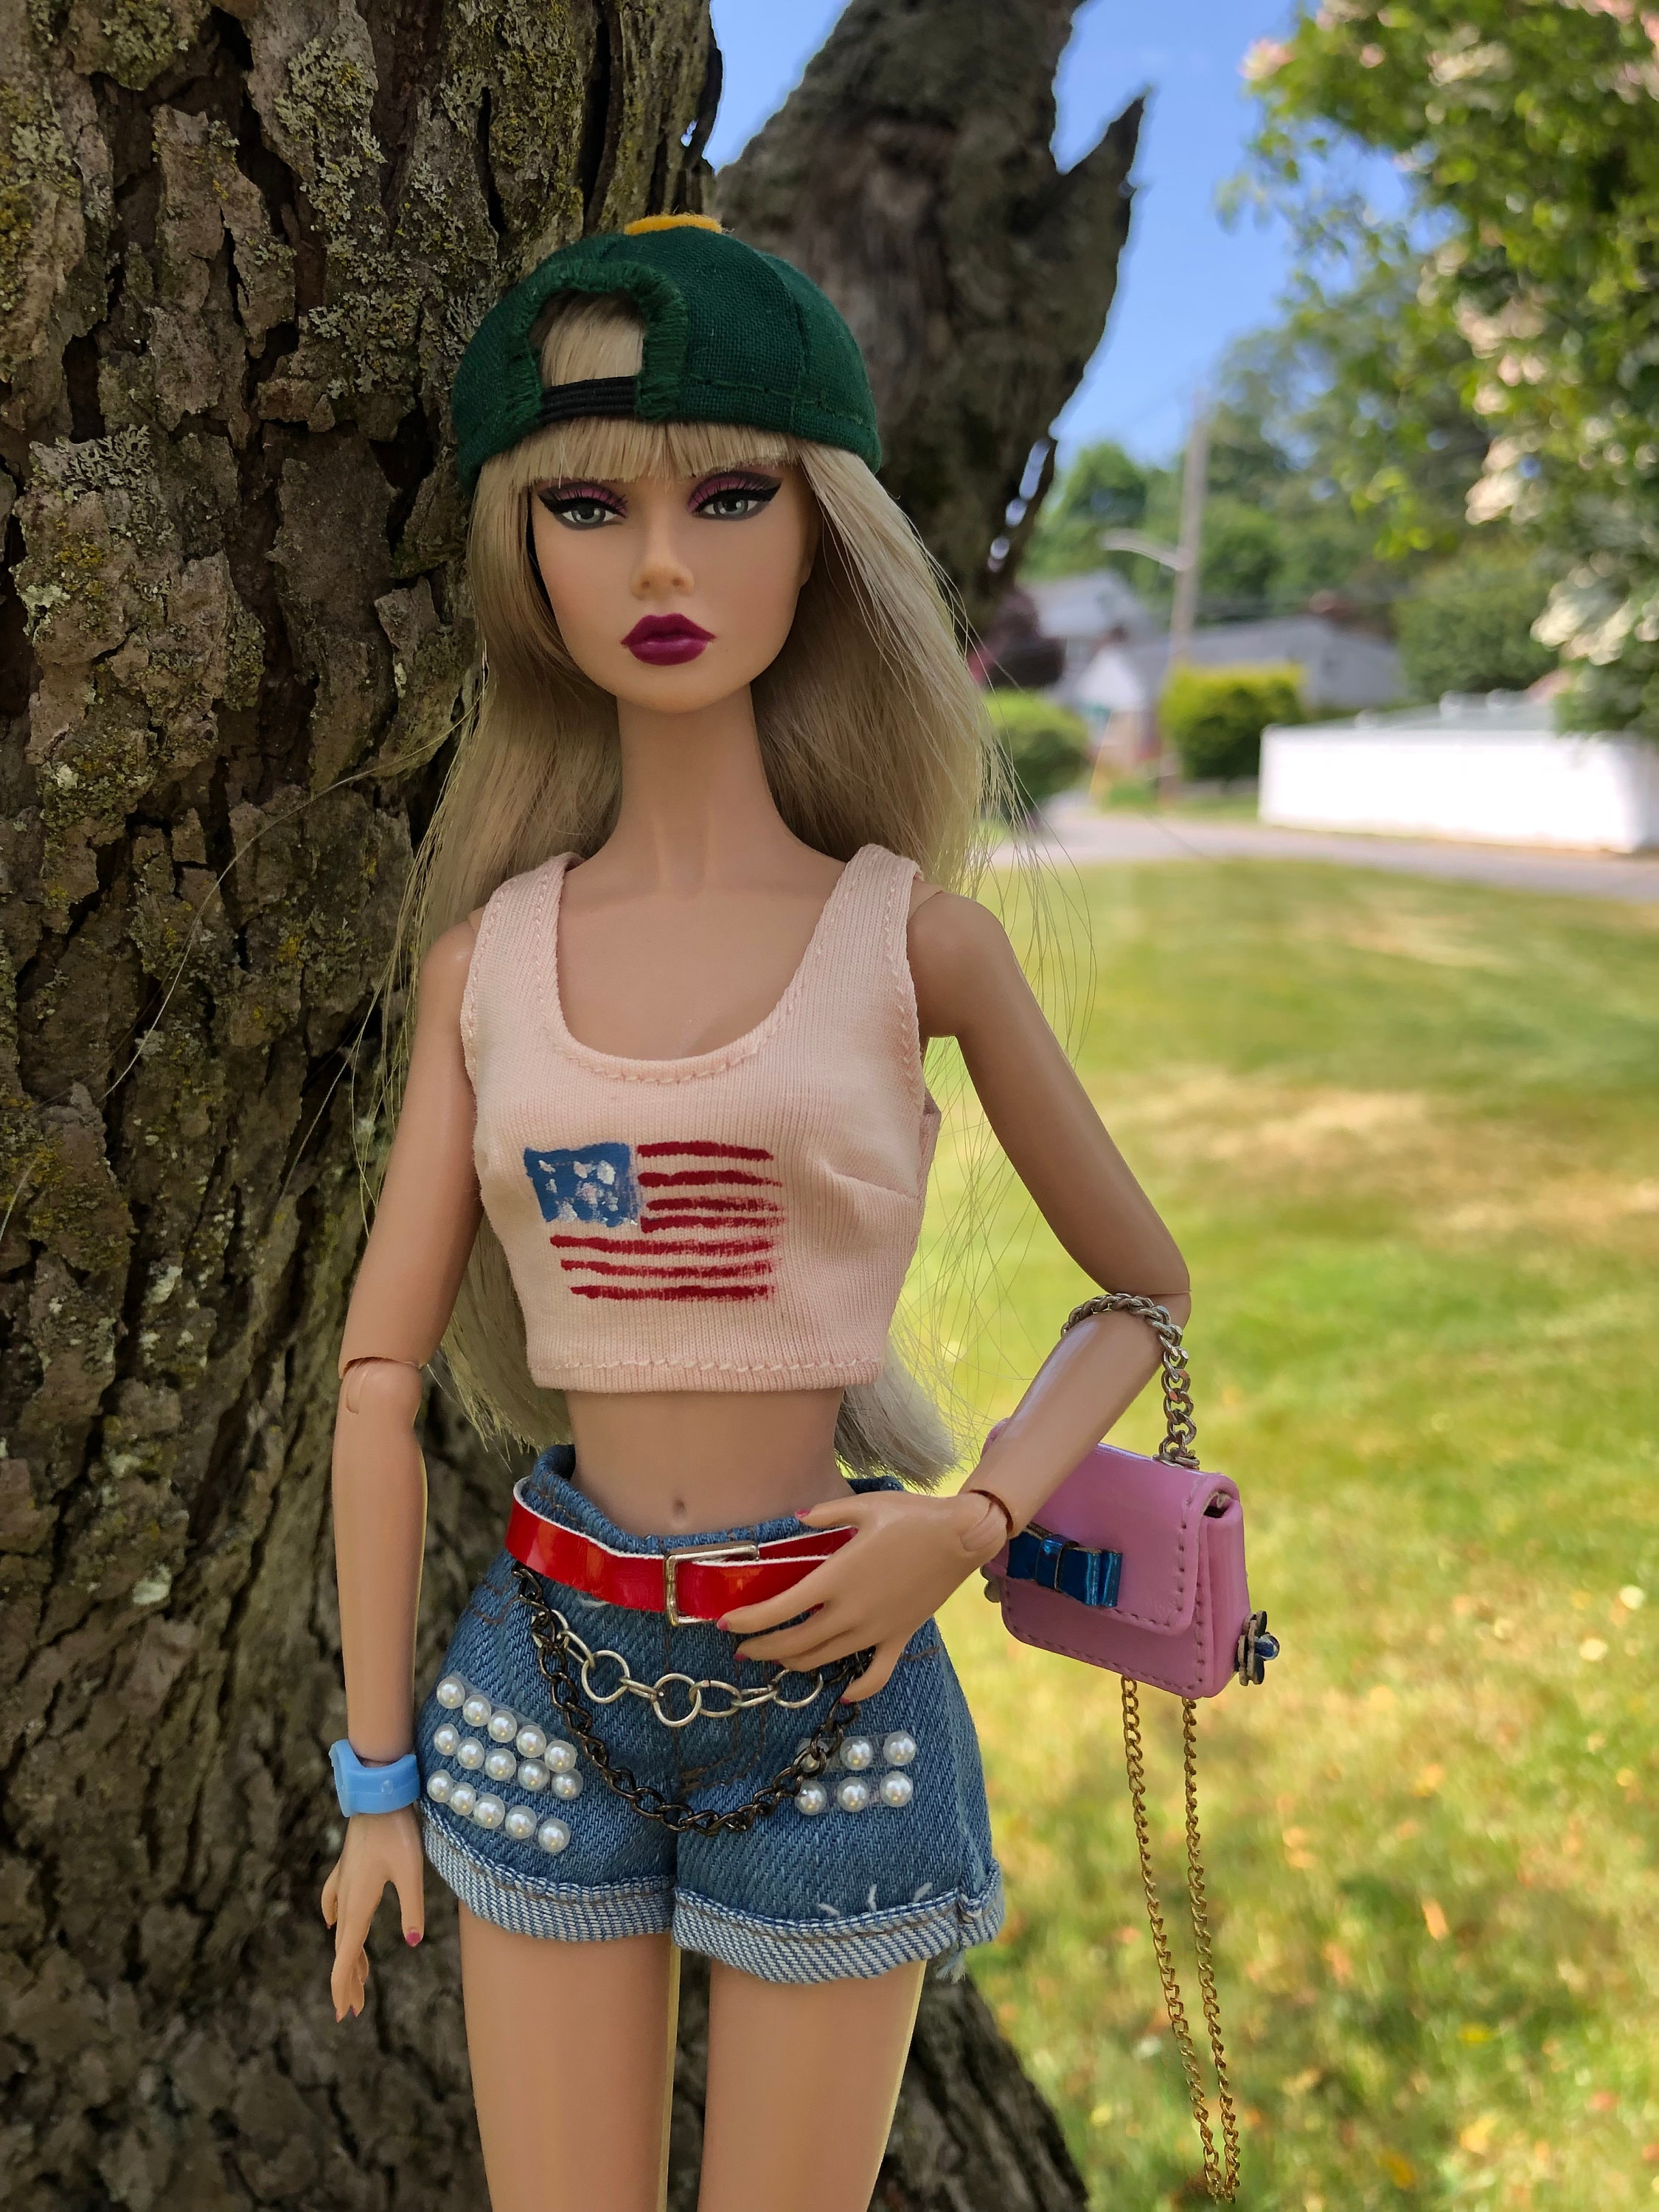 Barbie Fashions, Doll Clothing with Floral Top, Denim Shorts and  Accessories 